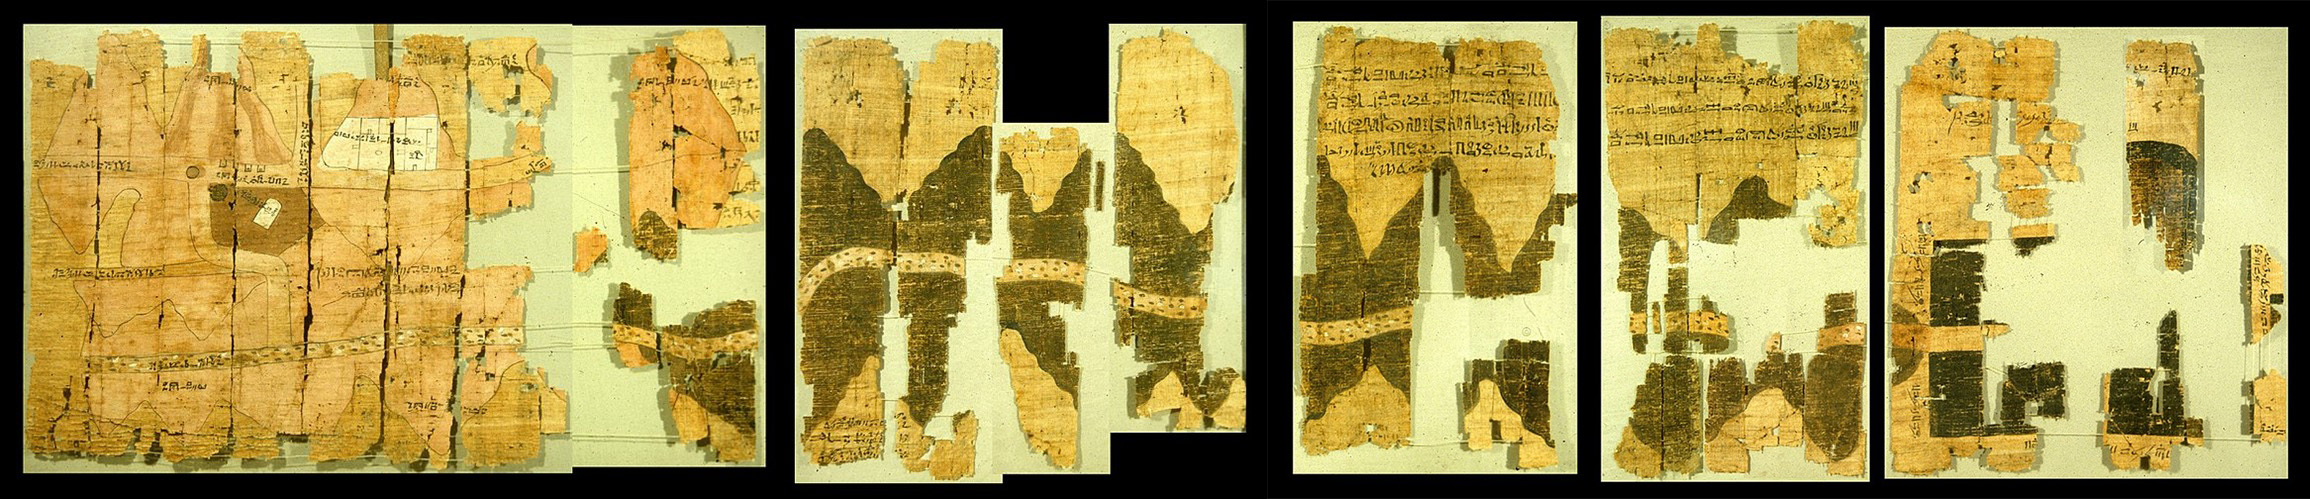 Reassembled fragments of the Turin papyrus